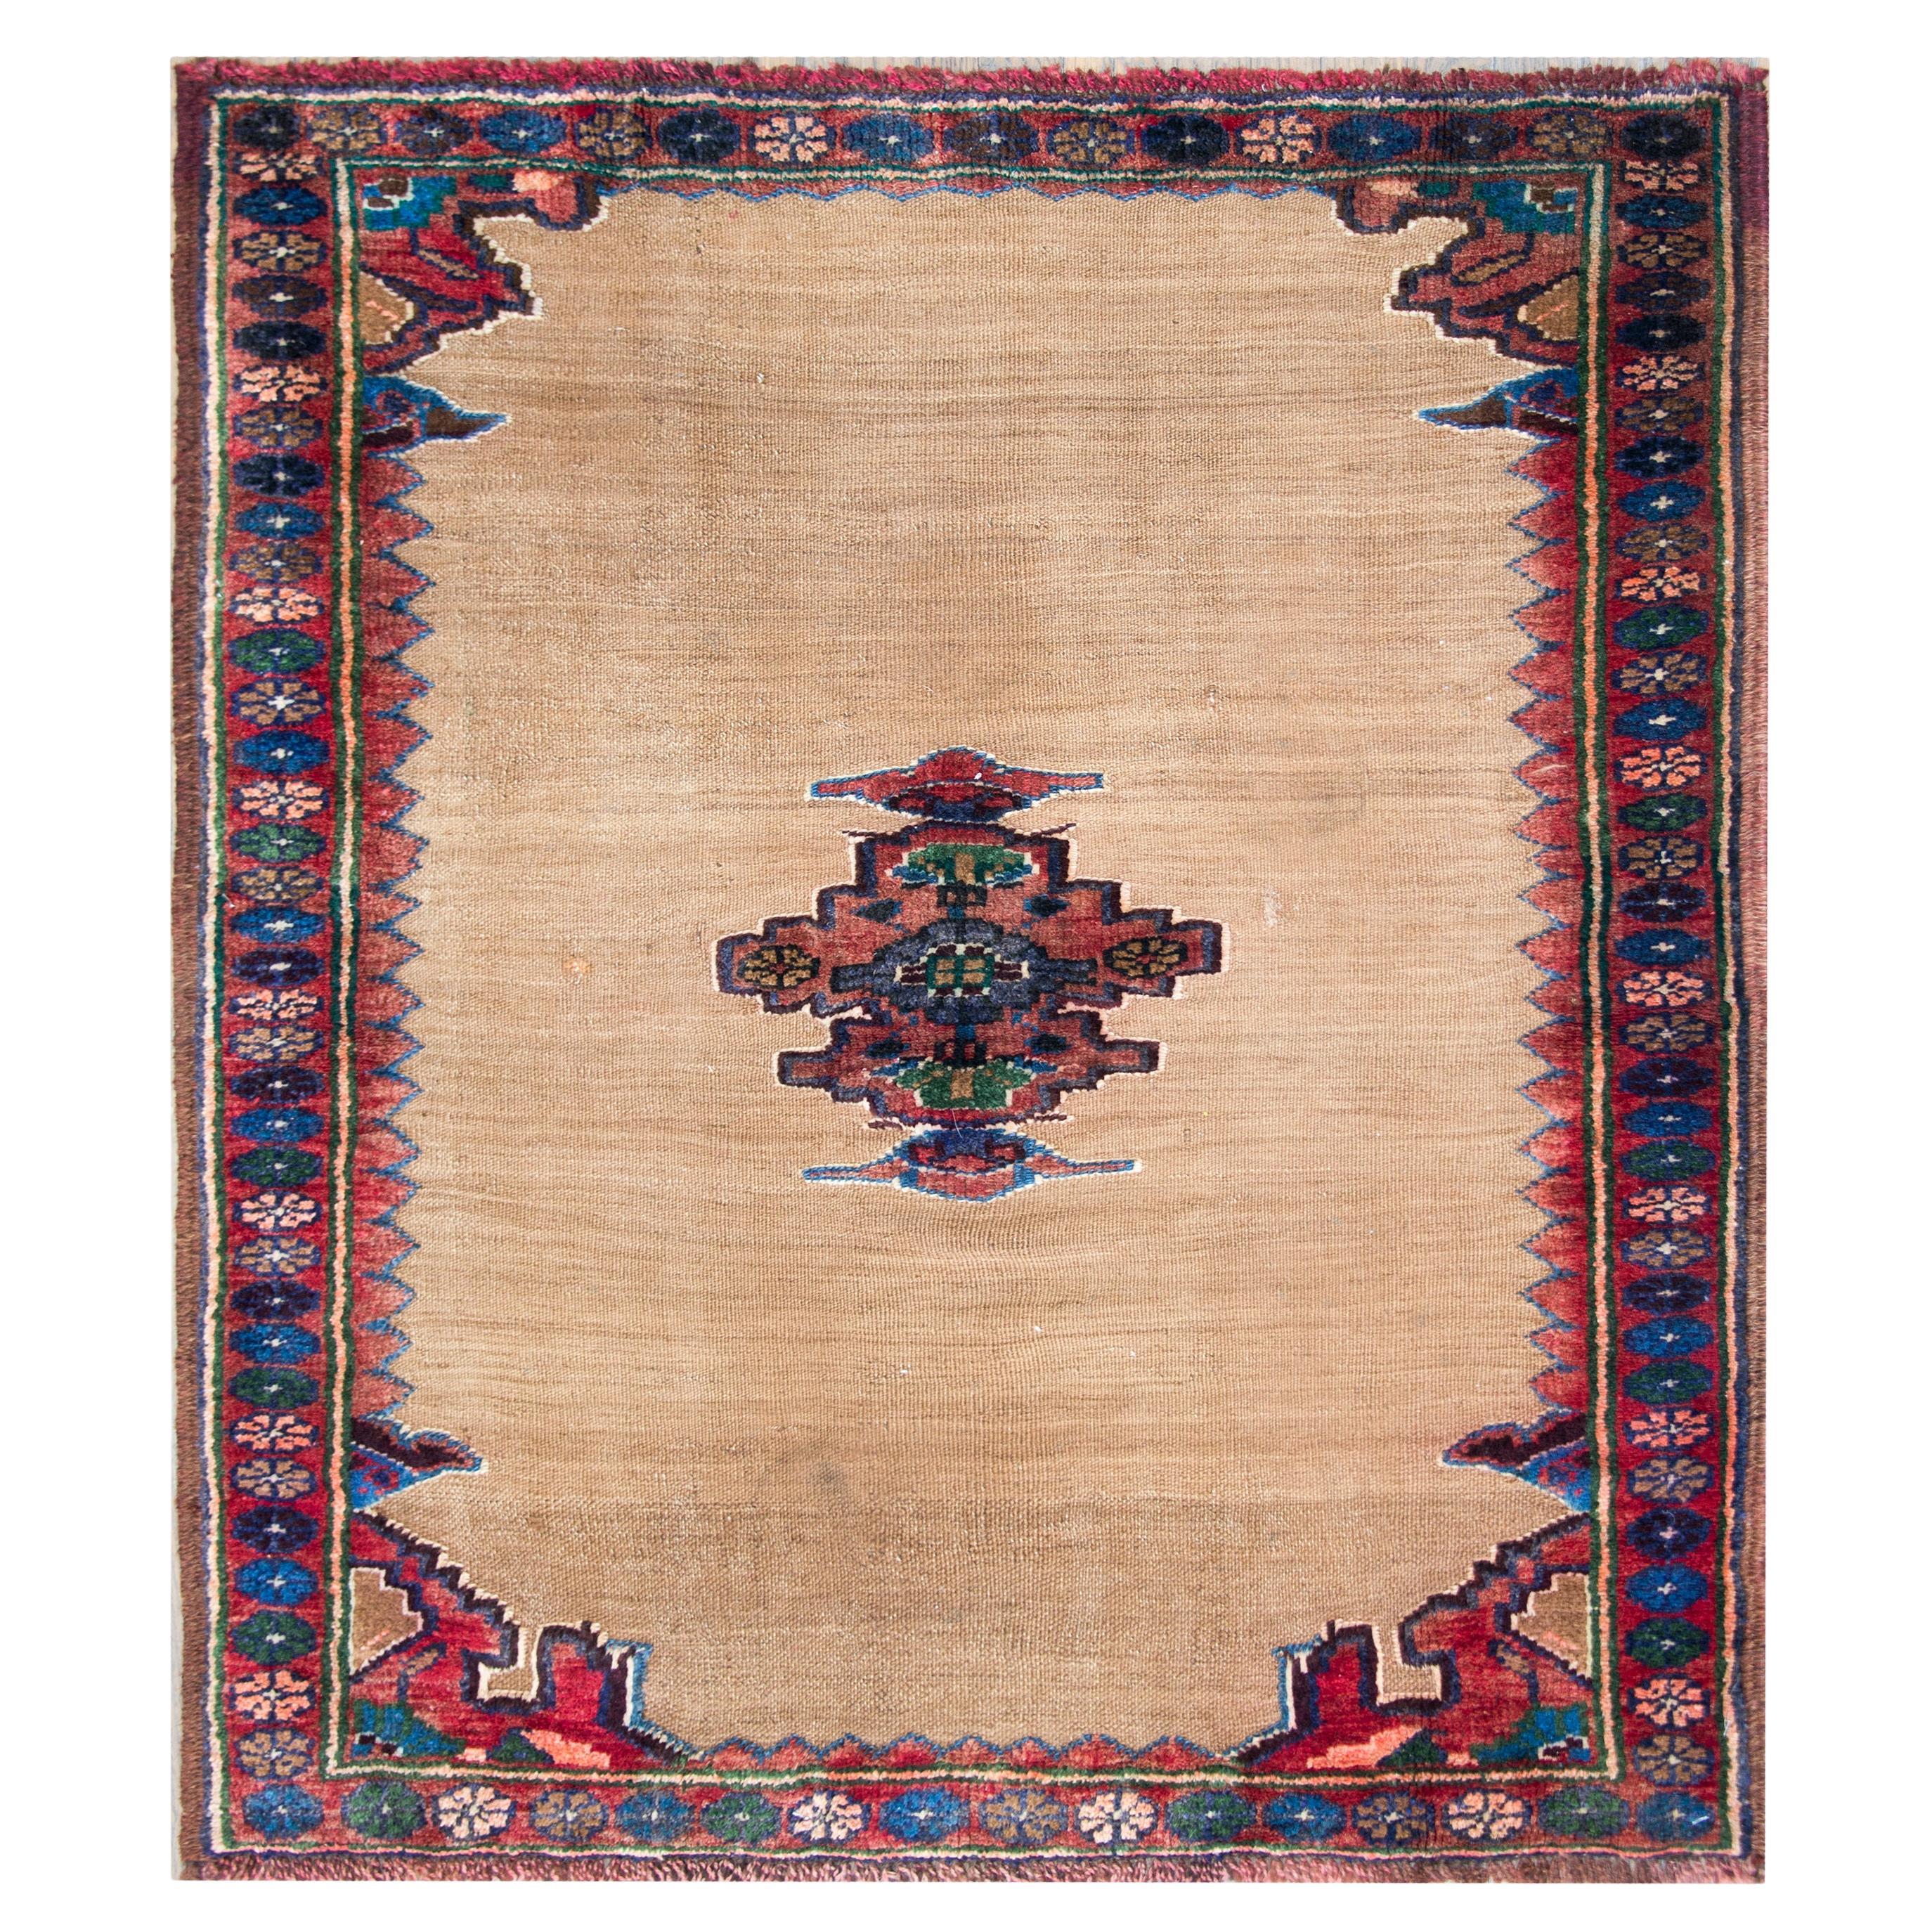 Early 20th Century Persian Afshar Sofreh Rug